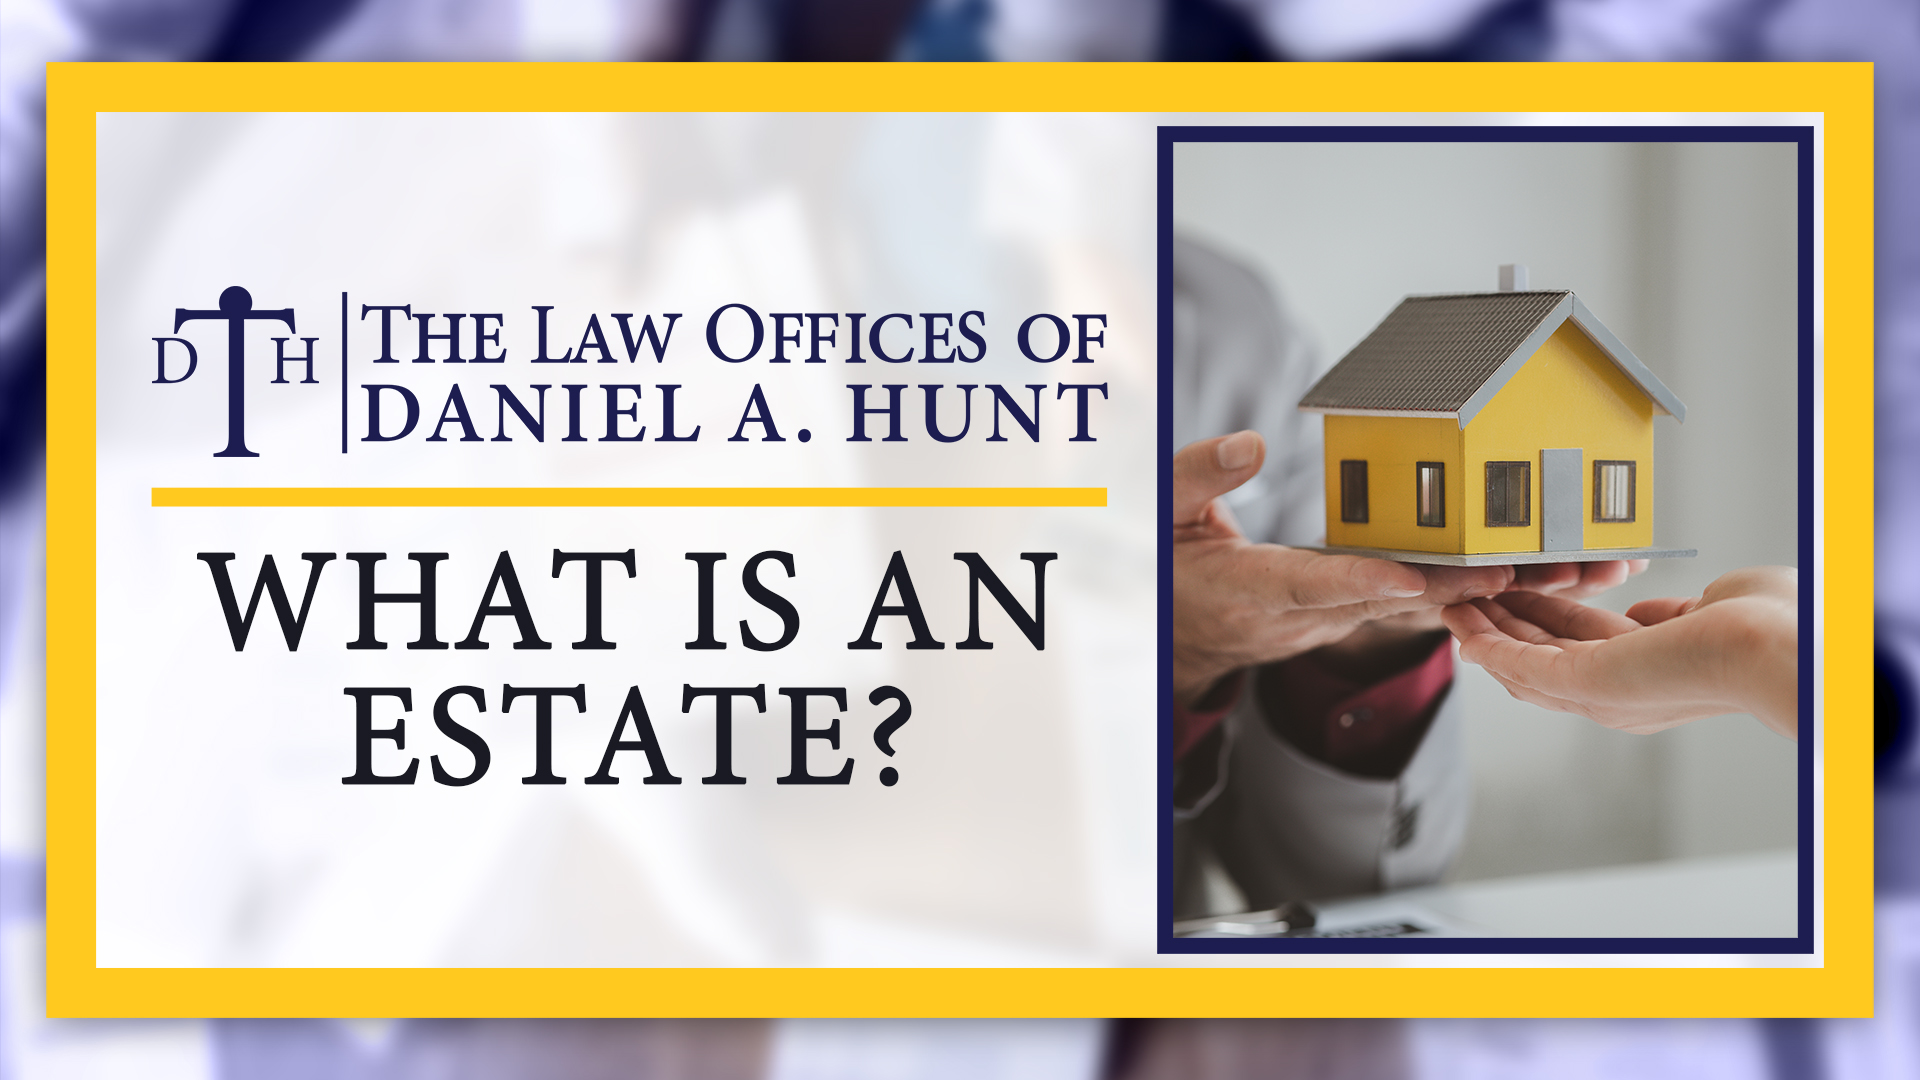 What is an estate?